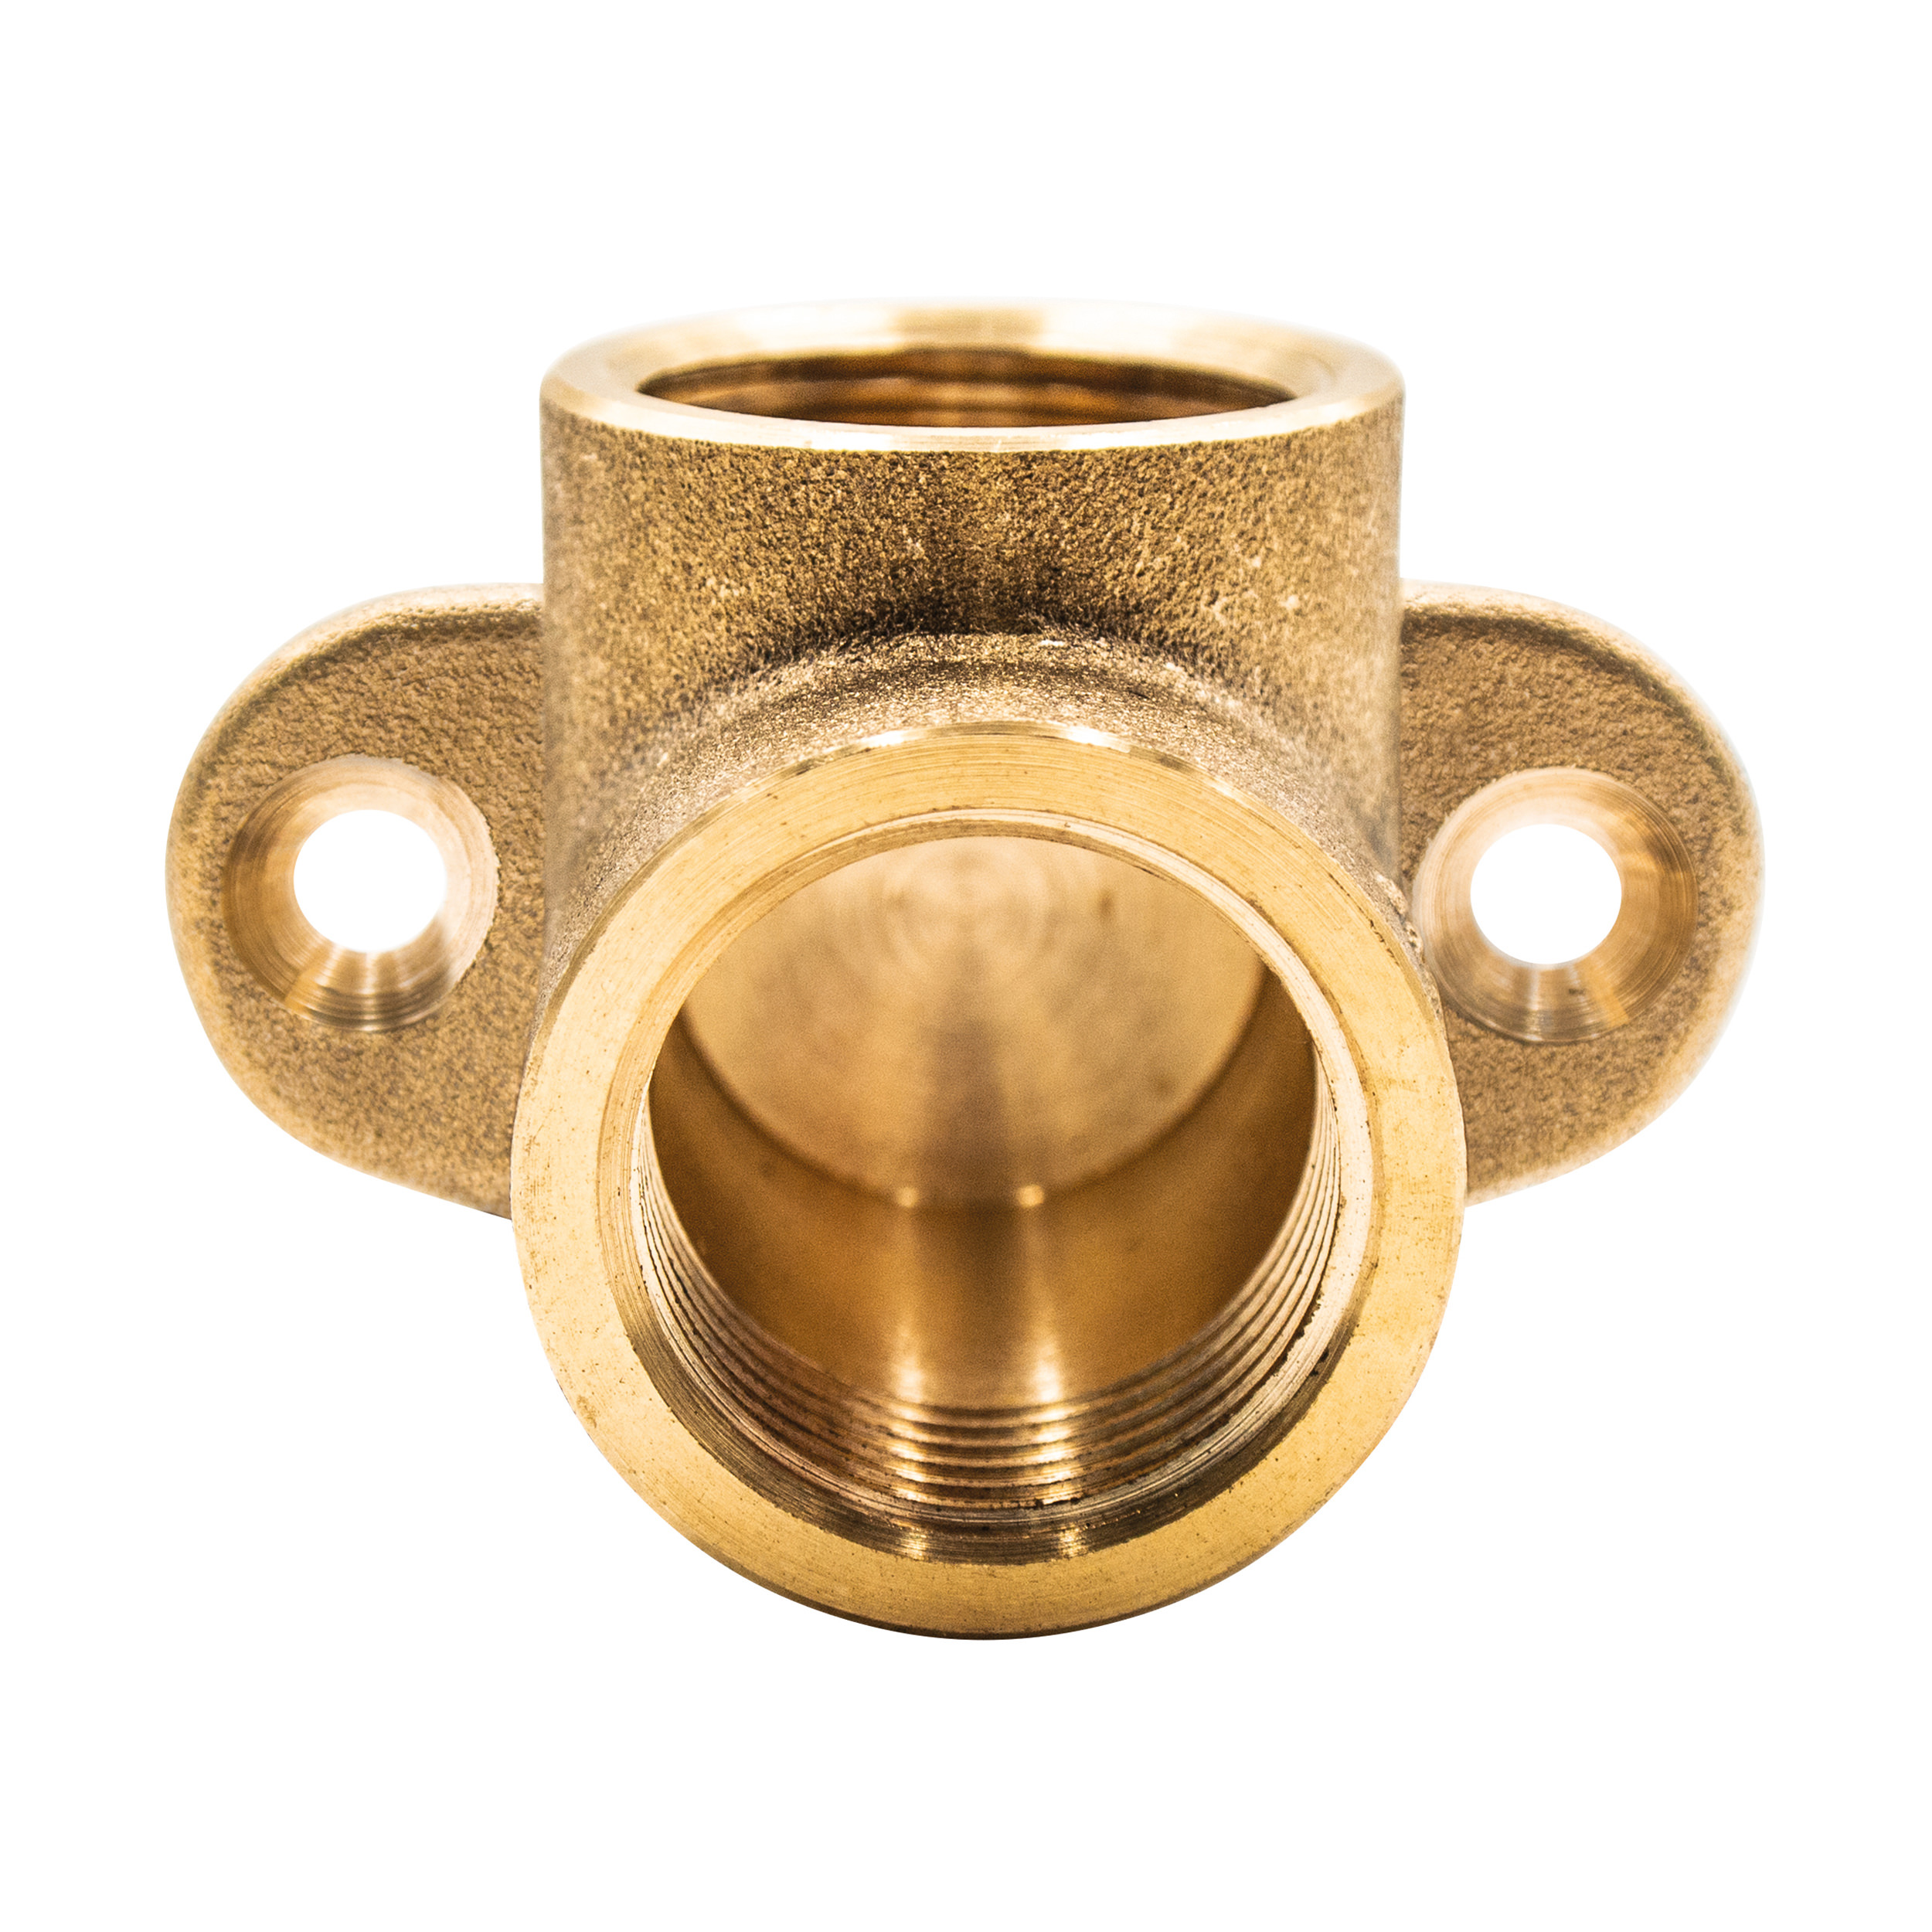 Elbow connector 90°, connection: 2 × G½ female, length: 52 mm, mounting holes distance (2): 38 mm, Ø mounting holes: 4.5 mm